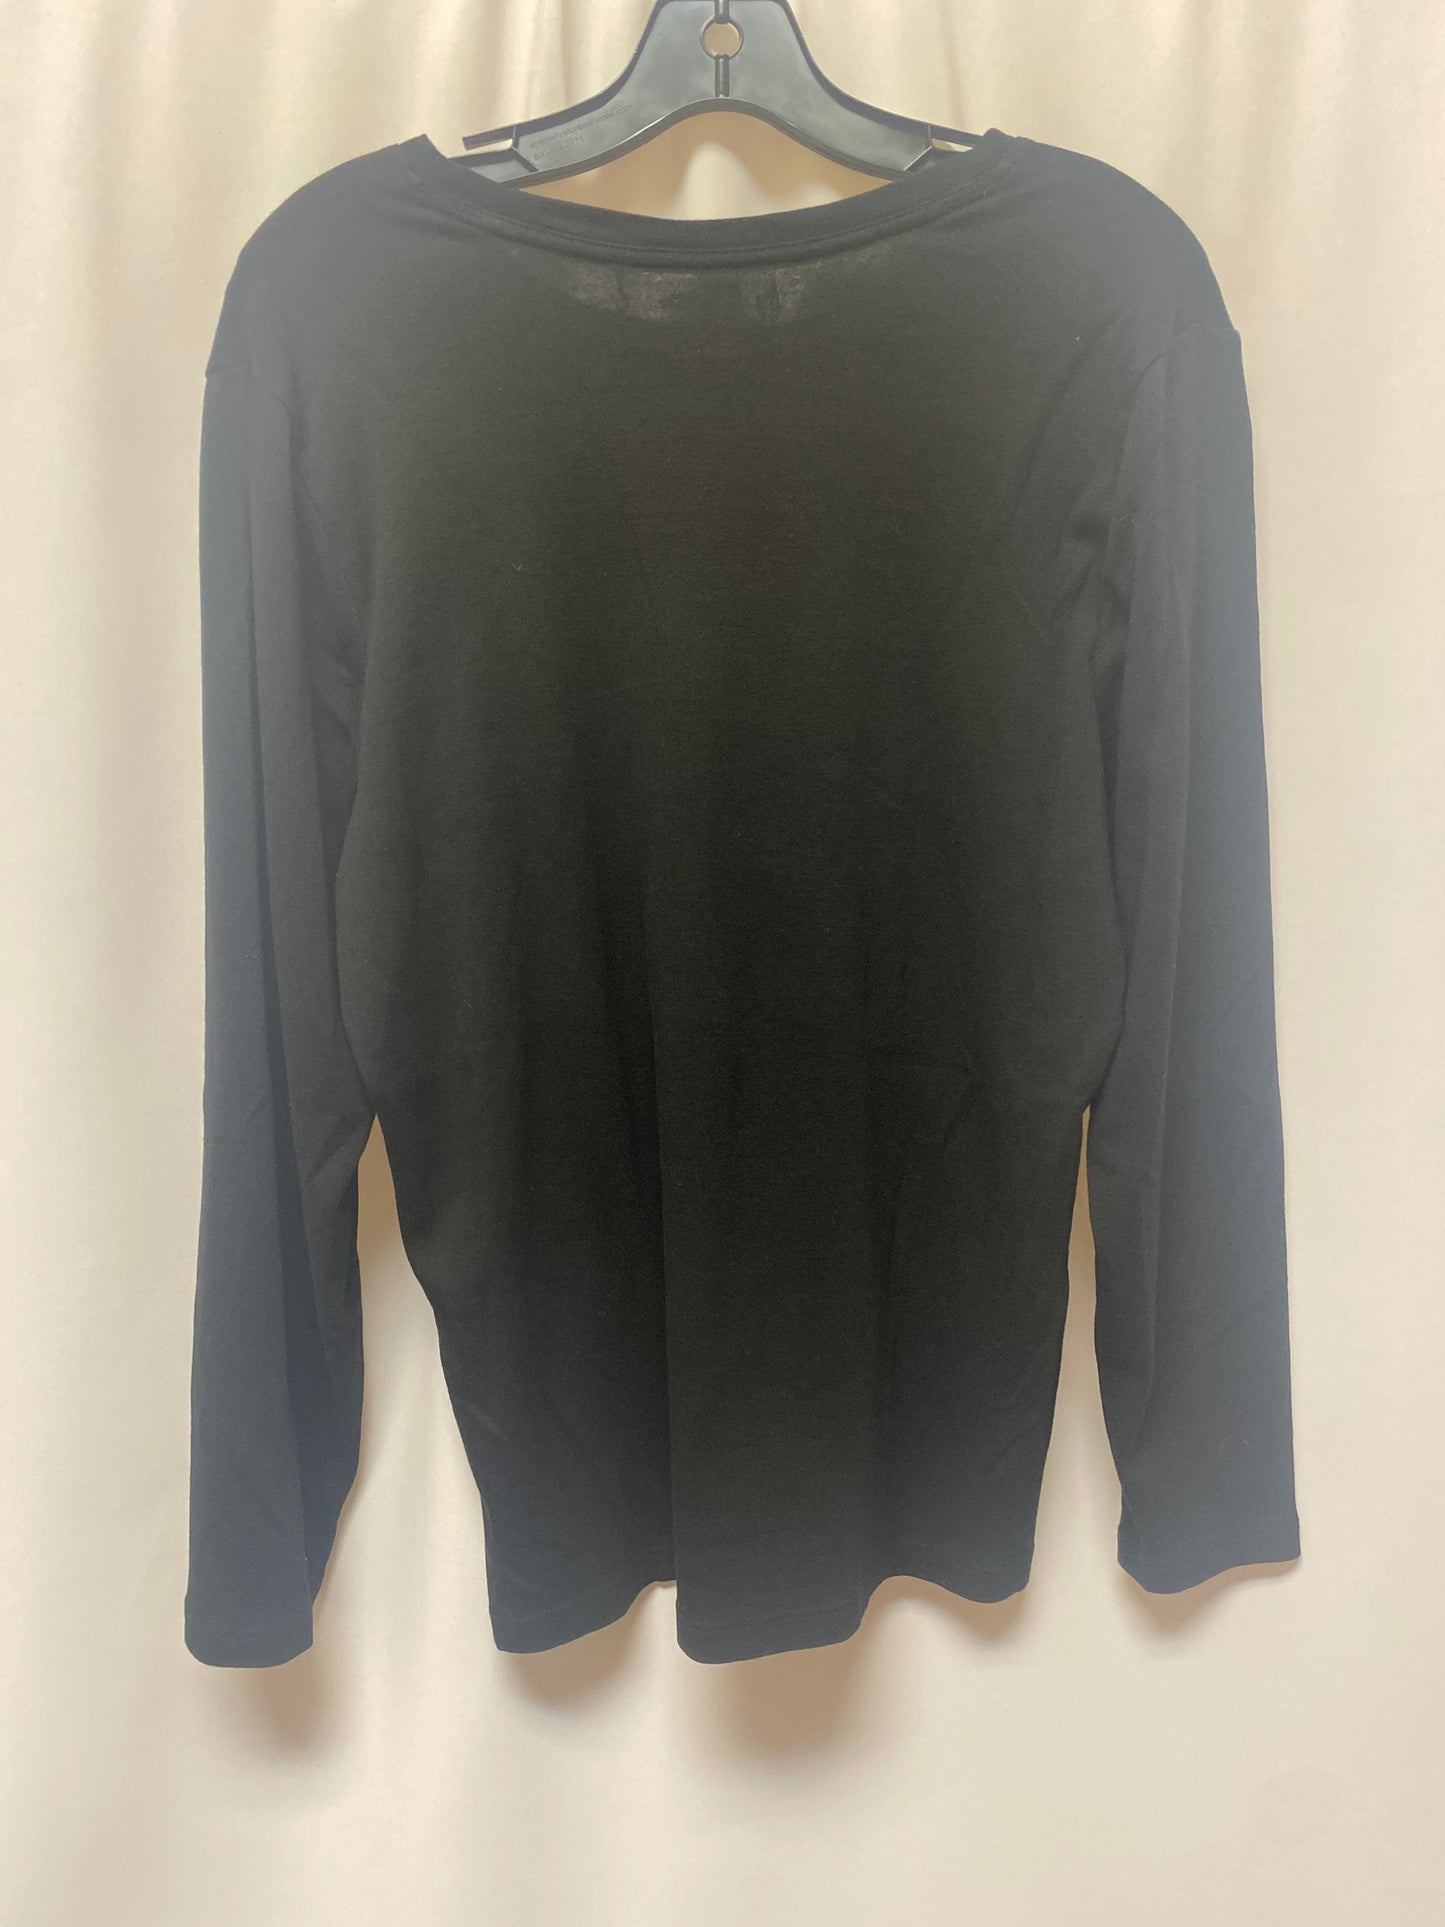 Black Top Long Sleeve Chicos, Size Xl